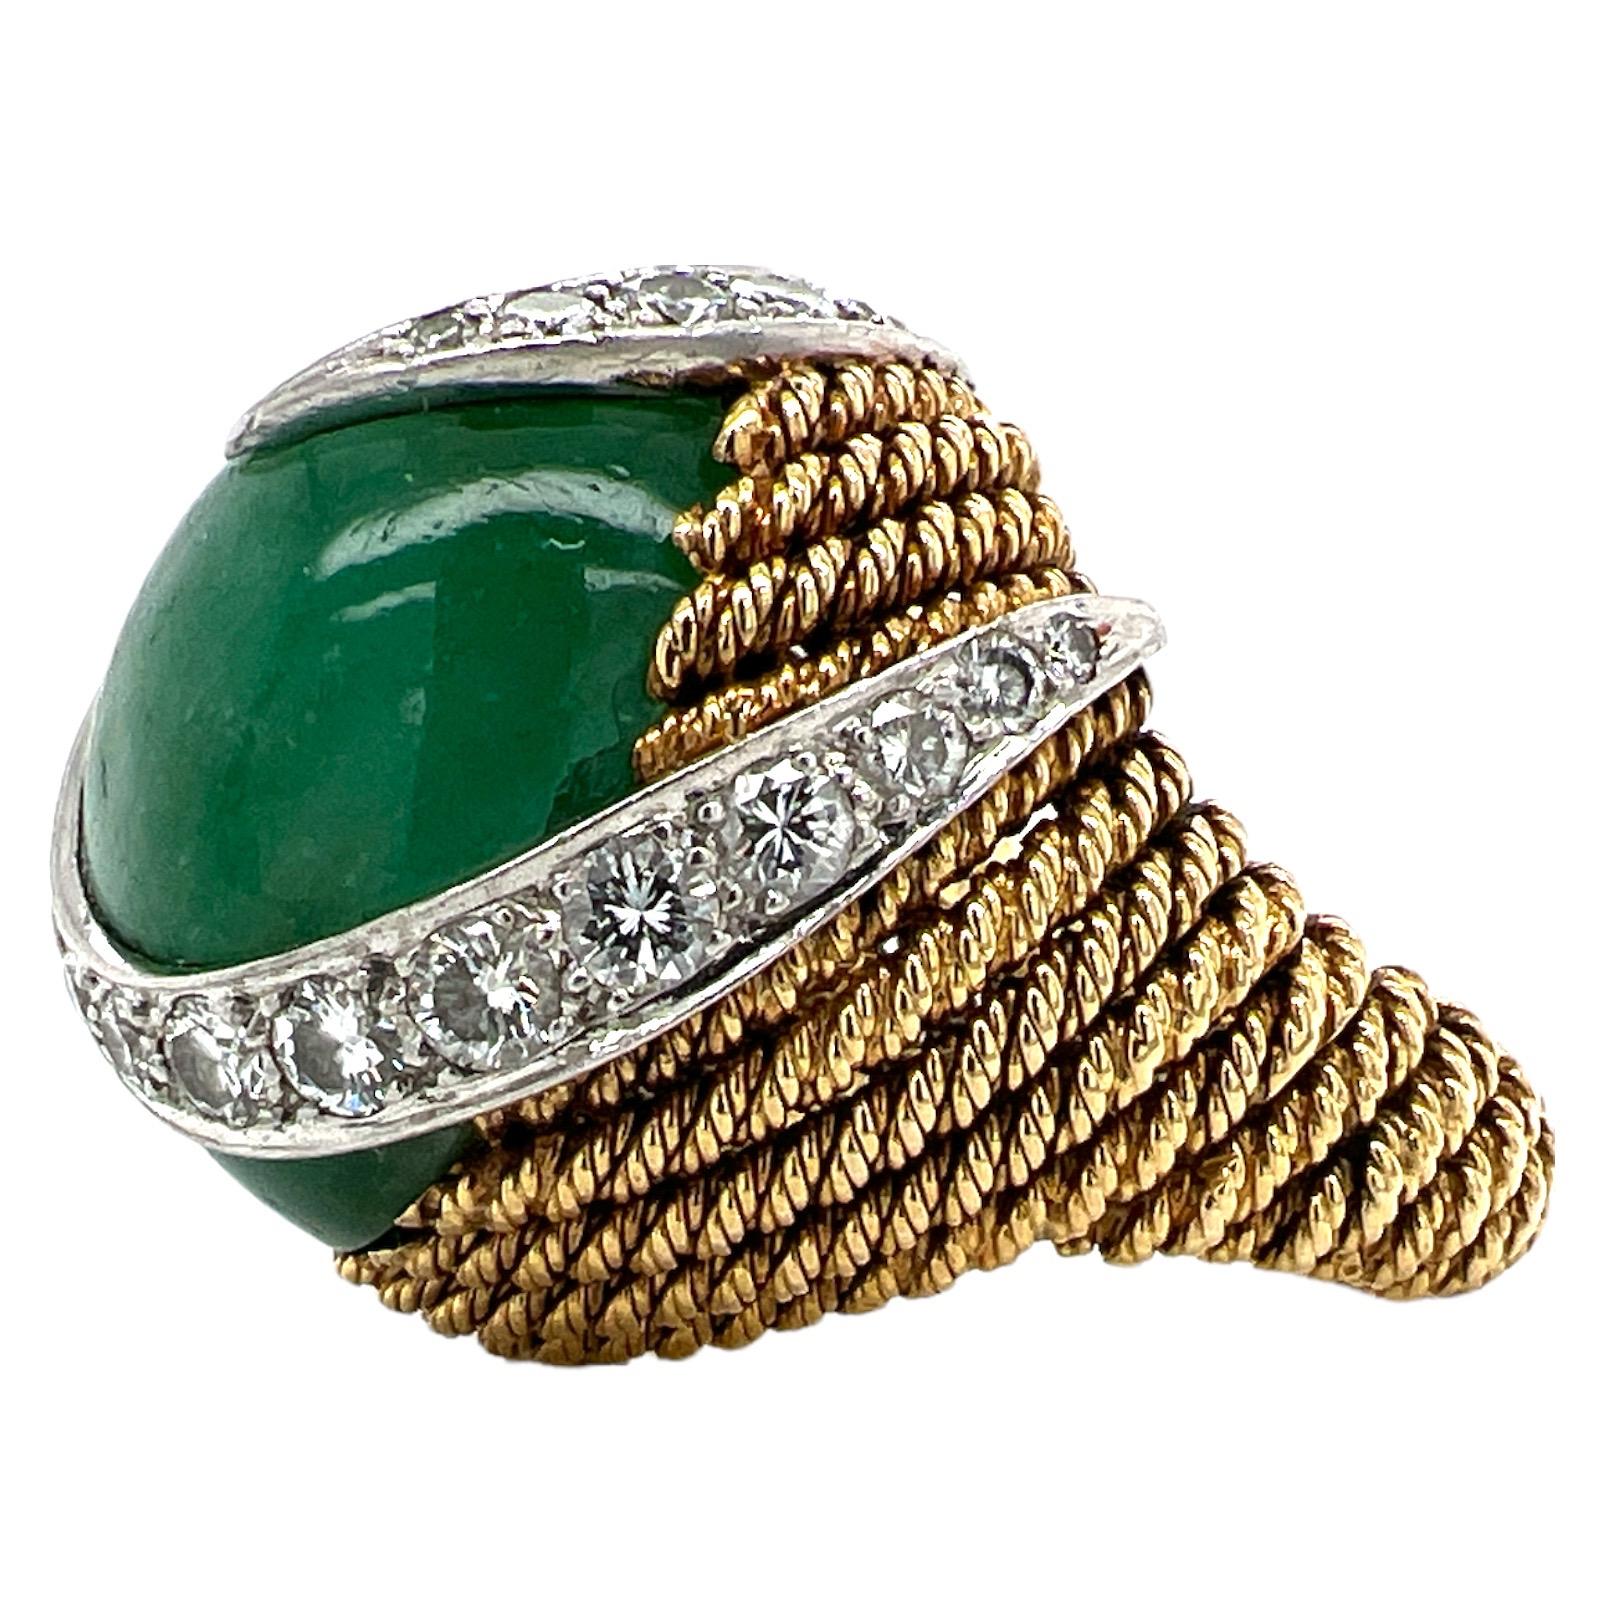 Fabulous emerald diamond cocktail ring makes a statement. The ring features an approximately 40 carat cabochon emerald with a rich green color. Round brilliant cut diamonds are set in platinum weighing approximately 1.50 CTW. The diamonds are grade